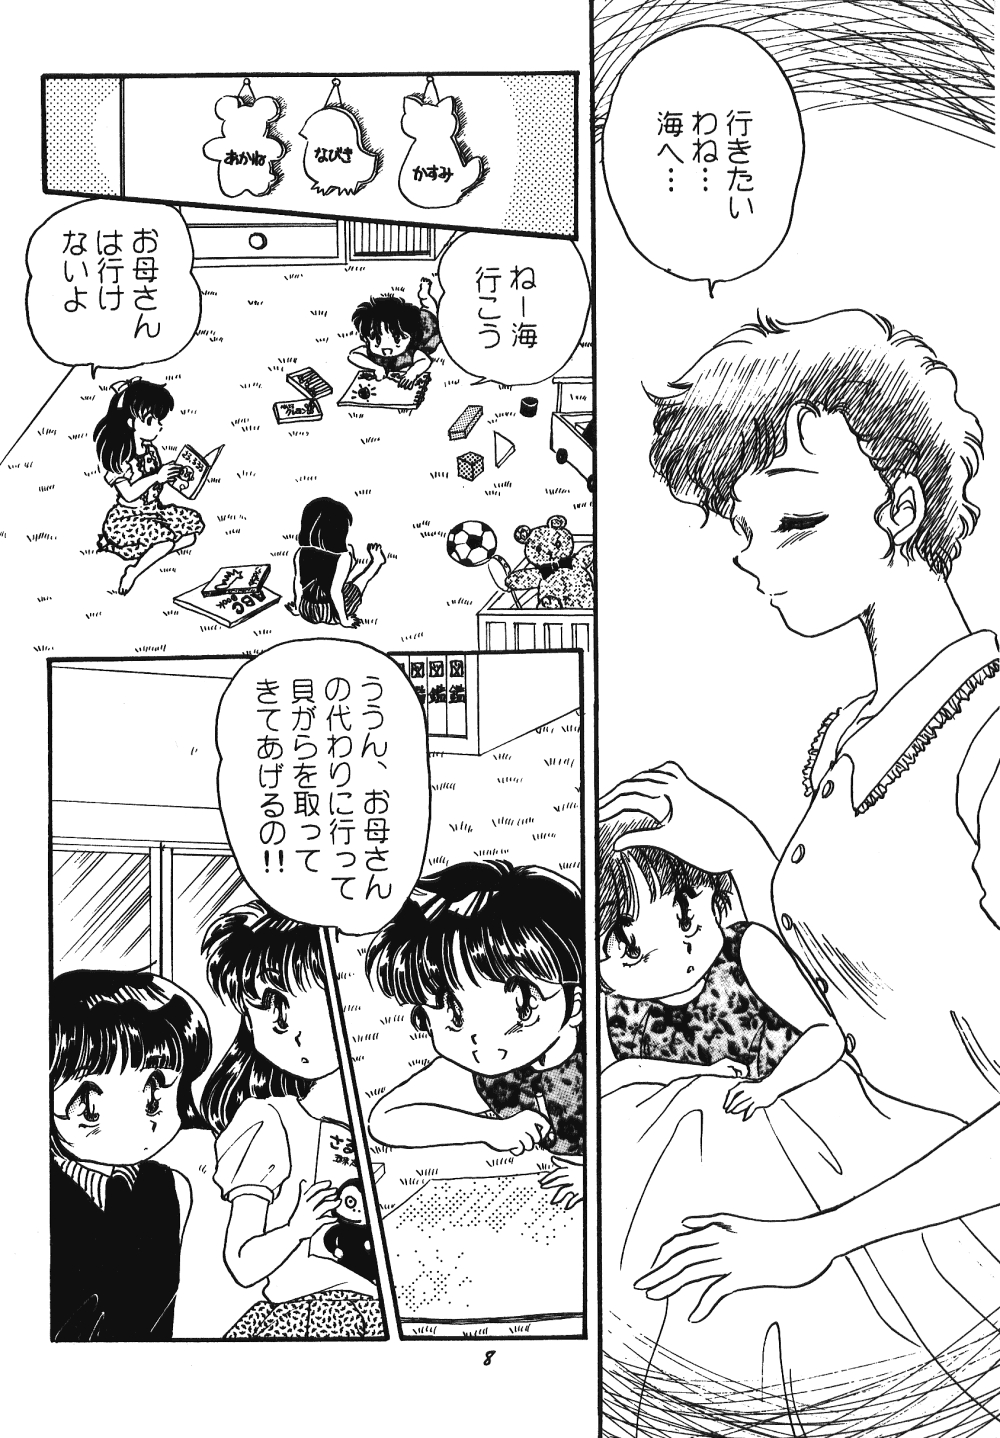 Never Forget Summer (Ranma 1/2) 6